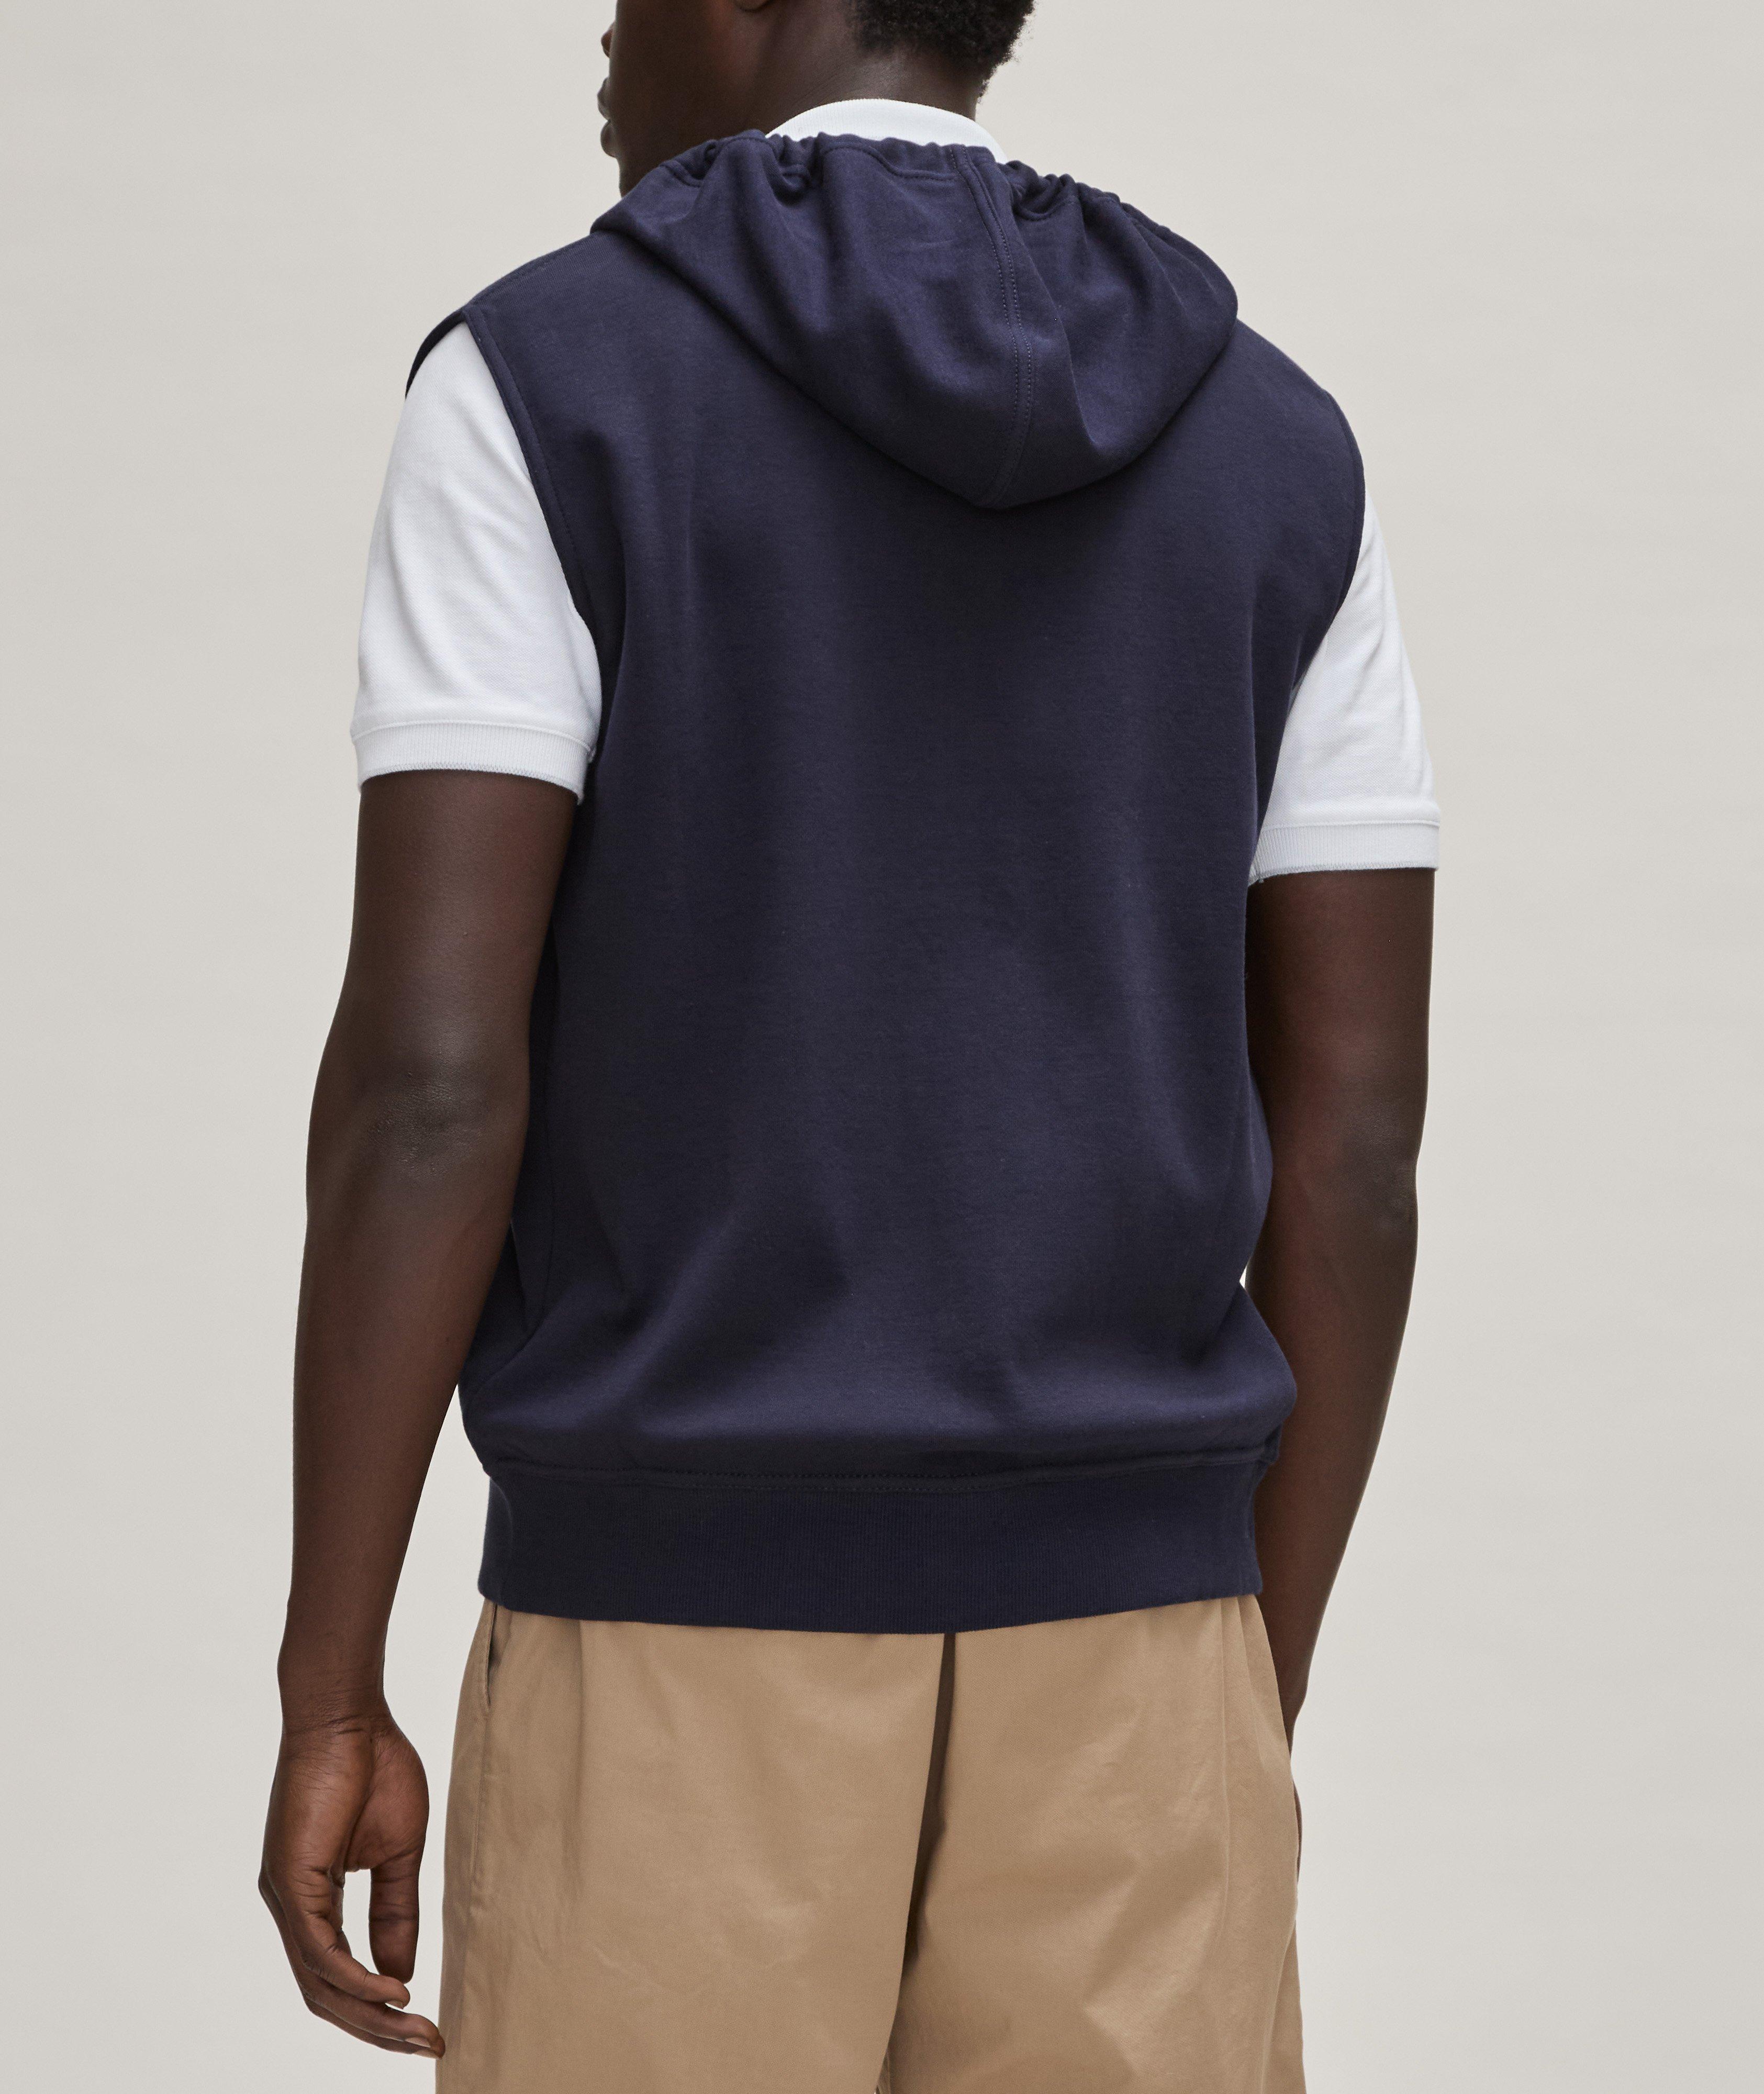 Travelwear Collection Hooded French Terry Cotton Vest image 2